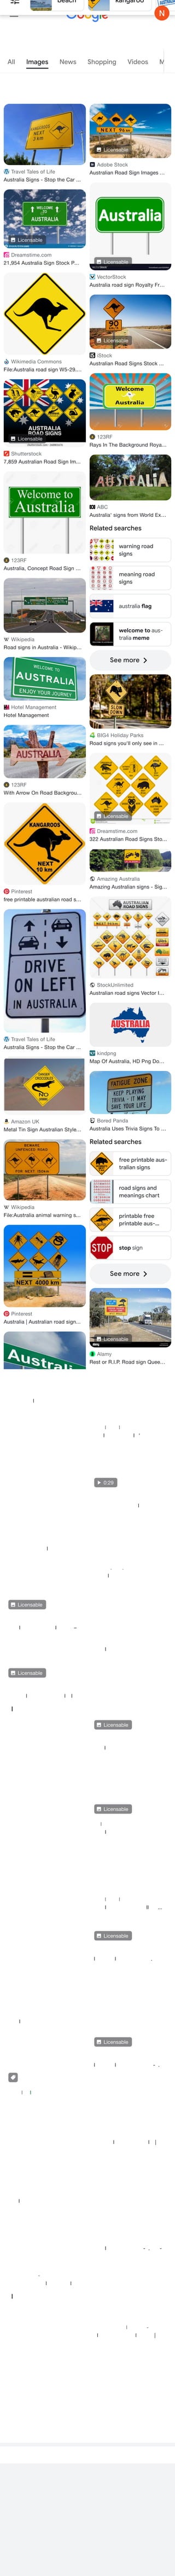 funny road signs
welcome to aus-
tralia sign
!ag australia
symbol
warning signs
See more
animal australian
road signs
australia logo
australian sign
language
road street signs
australia
See more
Travel Tales of Life
Australia Signs - Stop the Car ...
Licensable
Dreamstime.com
21,954 Australia Sign Stock P…
Wikimedia Commons
File:Australia road sign W5-29.…
Licensable
Shutterstock
7,859 Australian Road Sign Im…
123RF
Australia, Concept Road Sign …
Wikipedia
Road signs in Australia - Wikip…
Hotel Management
Hotel Management
123RF
With Arrow On Road Backgrou…
Pinterest
free printable australian road s…
DRIVE
ONLEFT
INAUSTRALIA
Travel Tales of Life
Australia Signs - Stop the Car ...
Amazon UK
Metal Tin Sign Australian Style…
Wikipedia
File:Australia animal warning s…
Pinterest
Australia | Australian road sign…
WhichCar
What Australian road signs rea…
Depositphotos
Road signs australia Stock Ph…
Licensable
Adobe Stock
Australian Road Sign Images –…
Licensable
Shutterstock
4,615 Welcome To Australia I…
Related searches
Rhino Car Hire
Road and Traffic Signs in Aust…
SeekPNG
Australian Road Signs Vector …
Pixels · In stock
Unfenced Stations Warning Si…
Lifeprint
australia" American Sign Lang…
WebEcoist - Momtastic
7 Amazing Australian Animal C…
Related searches
warning road
signs
meaning road
signs
australia !ag
welcome to aus-
tralia meme
See more
free printable aus-
tralian signs
road signs and
meanings cha!
printable free
printable aus-…
tralian road signs
stop sign
See more
Licensable
Adobe Stock
Australian Road Sign Images …
Licensable
VectorStock
Australia road sign Royalty Fr…
Licensable
iStock
Australian Road Signs Stock …
123RF
Rays In The Background Roya…
ABC
Australia' signs from World Ex…
Related searches
BIG4 Holiday Parks
Road signs you'll only see in …
Licensable
Dreamstime.com
322 Australian Road Signs Sto…
Amazing Australia
Amazing Australian signs - Sig…
StockUnlimited
Australian road signs Vector I…
kindpng
Map Of Australia, HD Png Do…
Bored Panda
Australia Uses Trivia Signs To …
Related searches
Licensable
Alamy
Rest or R.I.P. Road sign Quee…
Daily Mail
Drive left in Australia' road sig…
0:29
YouTube
How to Sign "Australia" in Sig…
News.com.au
Queensland road sign advisin…
TTFS
Australian Road Signs And Me…
Licensable
VectorStock
australia are a neon sign Vect…
Licensable
Alamy
Australian warning road sign o…
Daily Mail
Australian road signs will be ...
Licensable
Wikivoyage
File:Australia Banner Sign.jpg …
Licensable
Wikimedia Commons
File:Australia road sign W2-1.…
Base Backpackers
Strange Places in Australia | 1…
Wikipedia
Australia road sign W3-3.svg -…
Free Printable Signs -
Welcome To Australia Sign | F…
All Images News Shopping Videos Maps
Wait while more content is being loaded
beach kangaroo
 